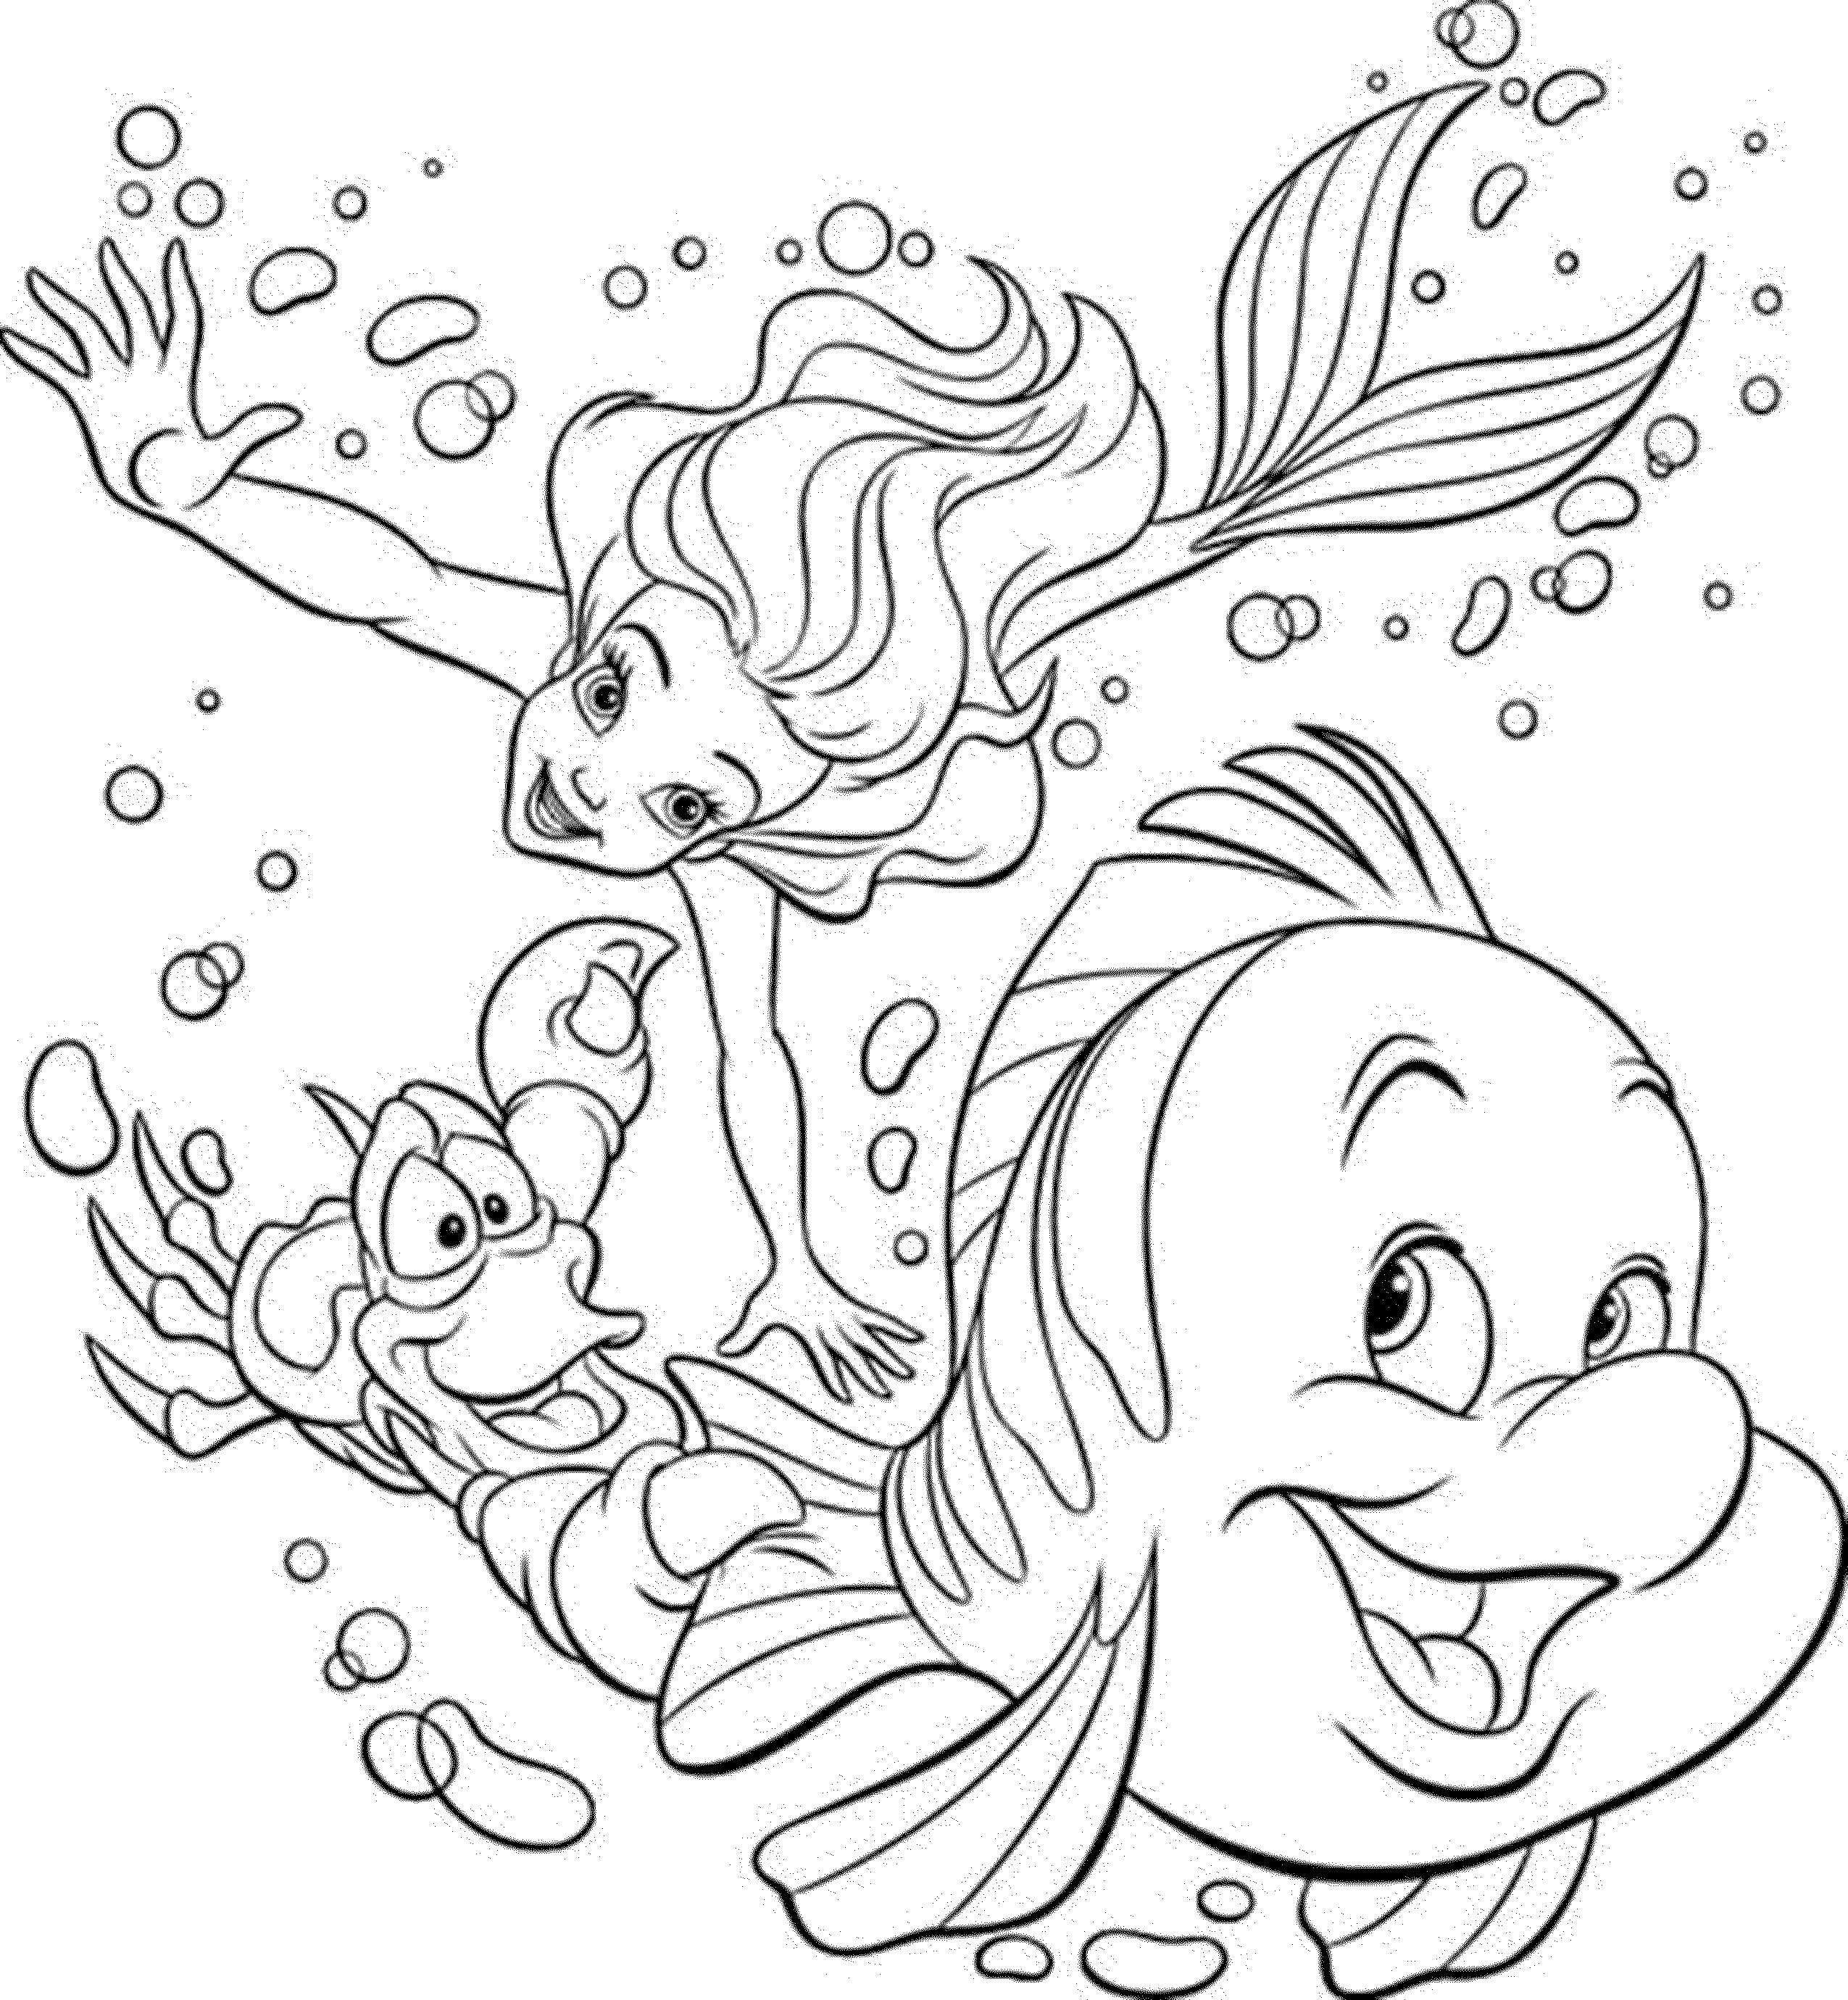 Coloring Pages Disney Princesses New Easy Printable Princess Coloring Pages for Funny Page Unique All Fresh